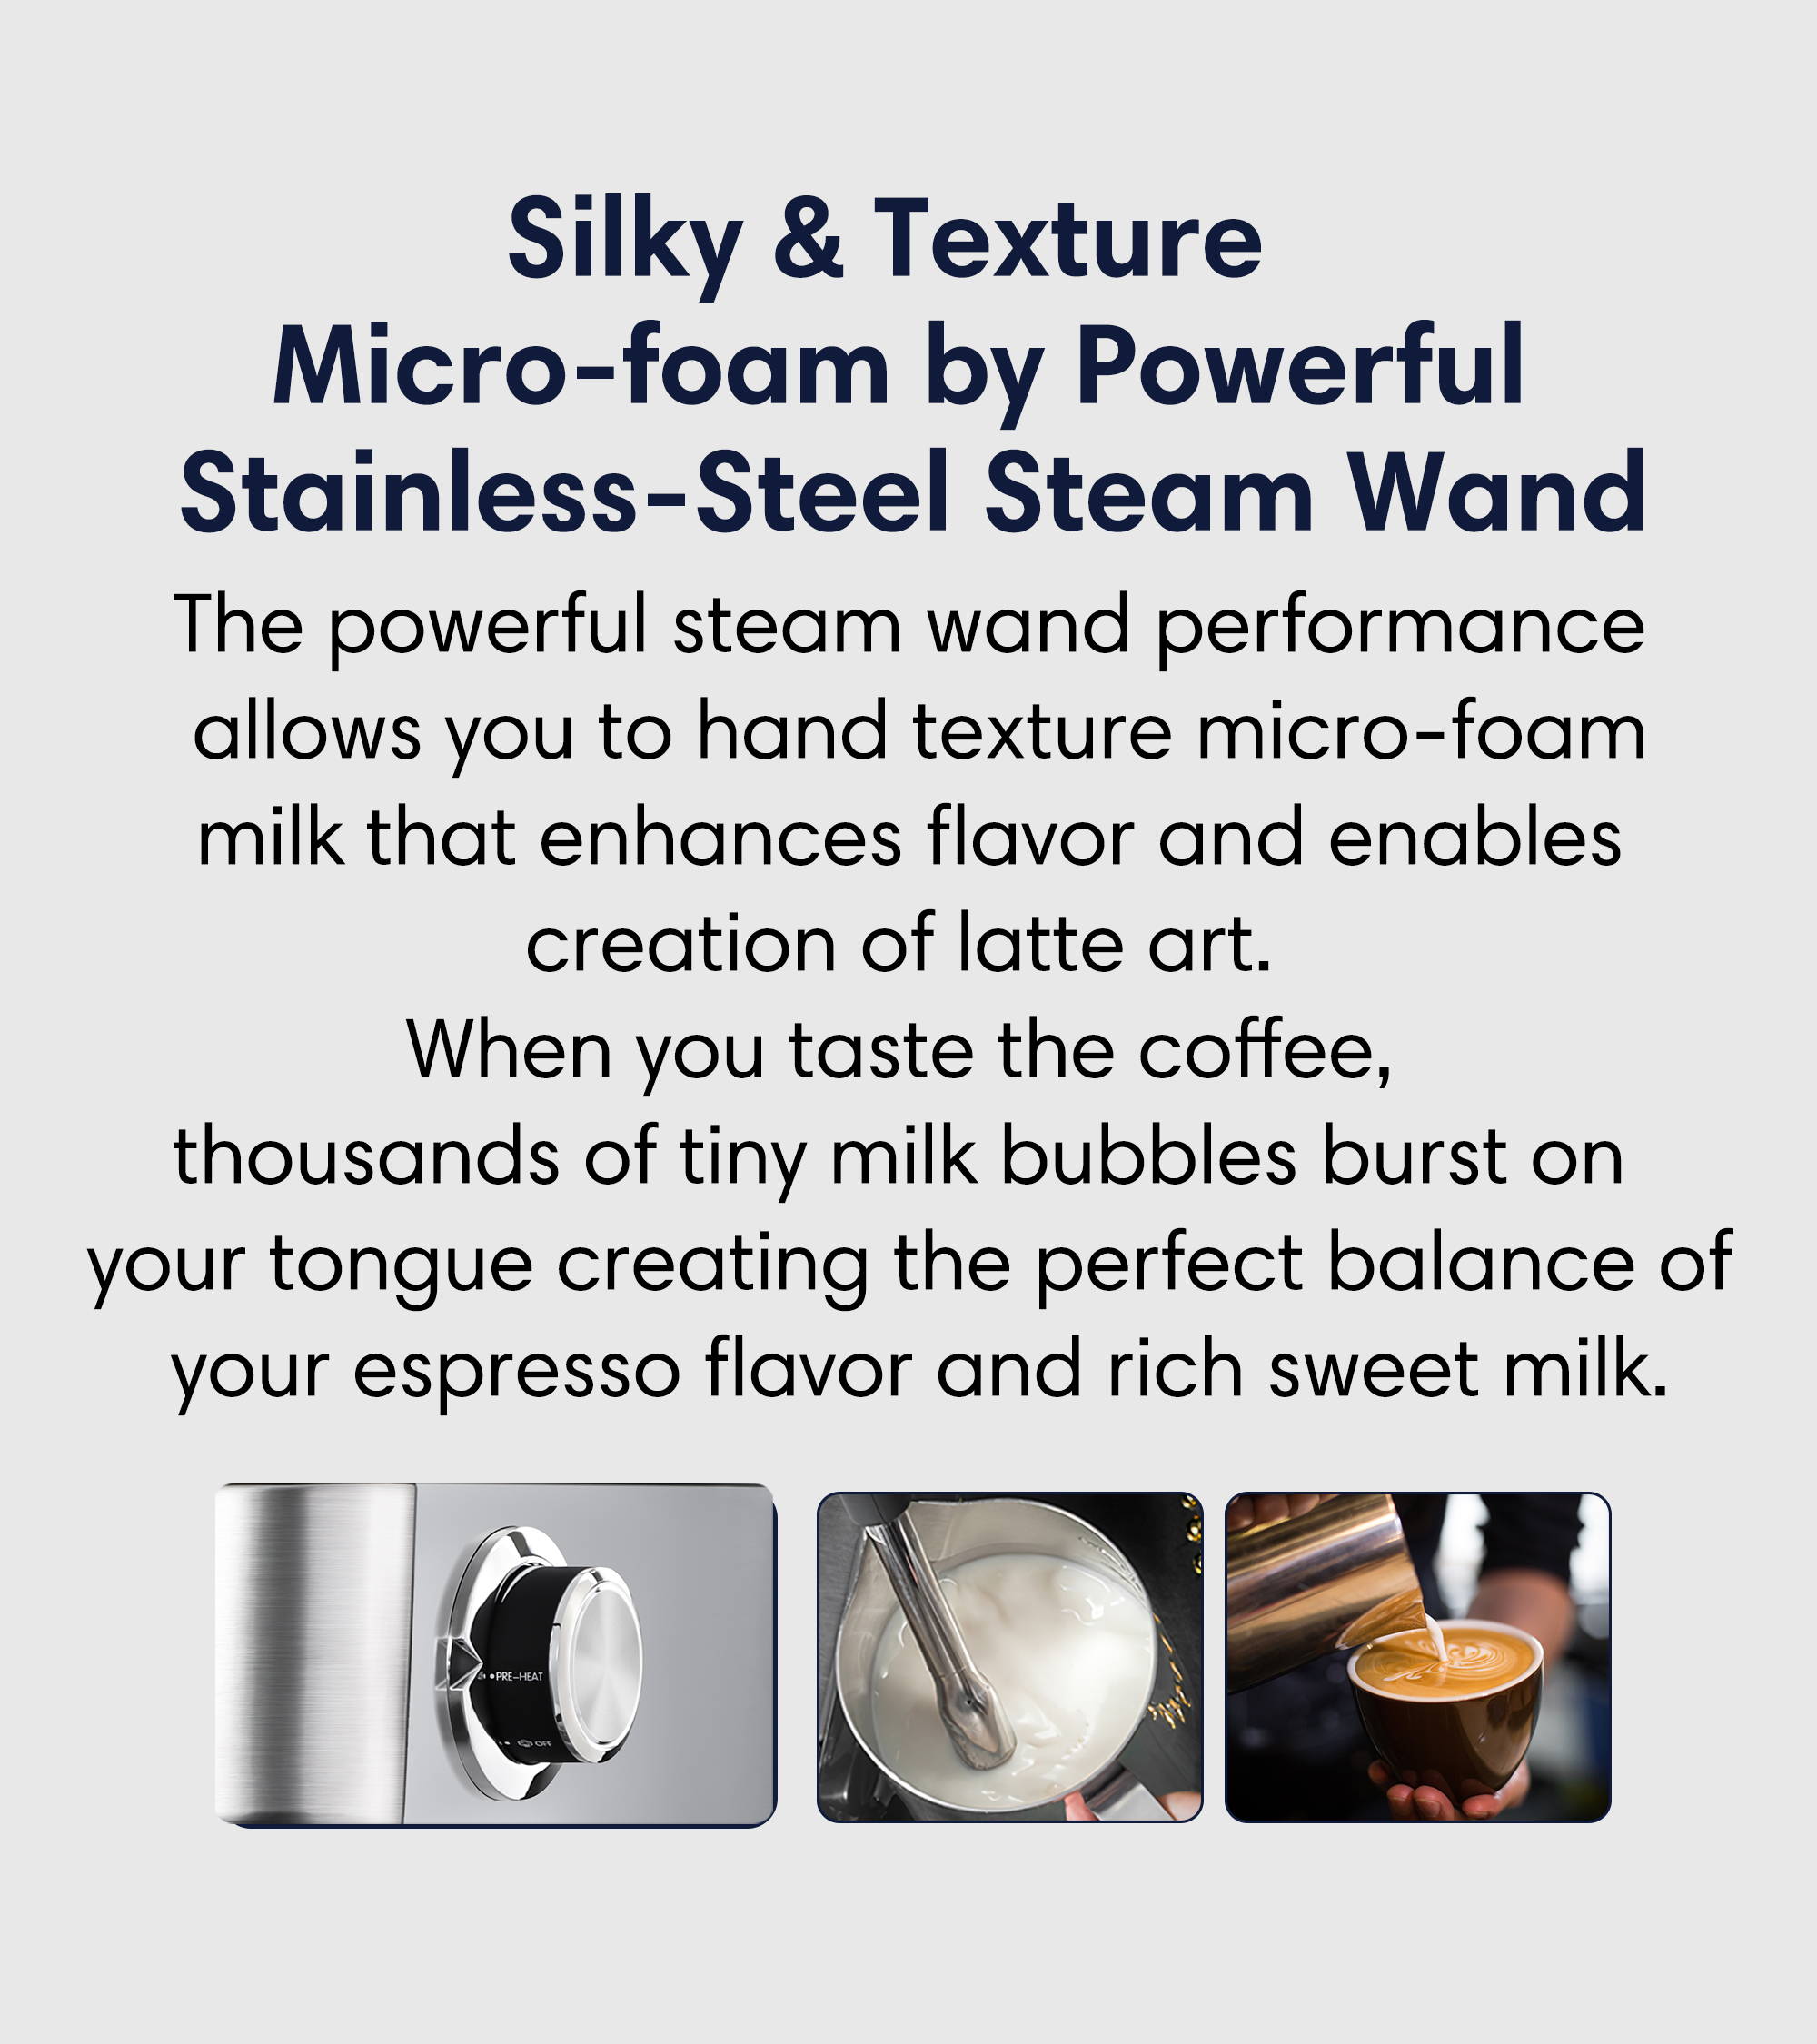 Silky and texture micro-foam the steam wand performance allows you to hand texture micro-foam milk that enhances flavor and enables creation of latte art.